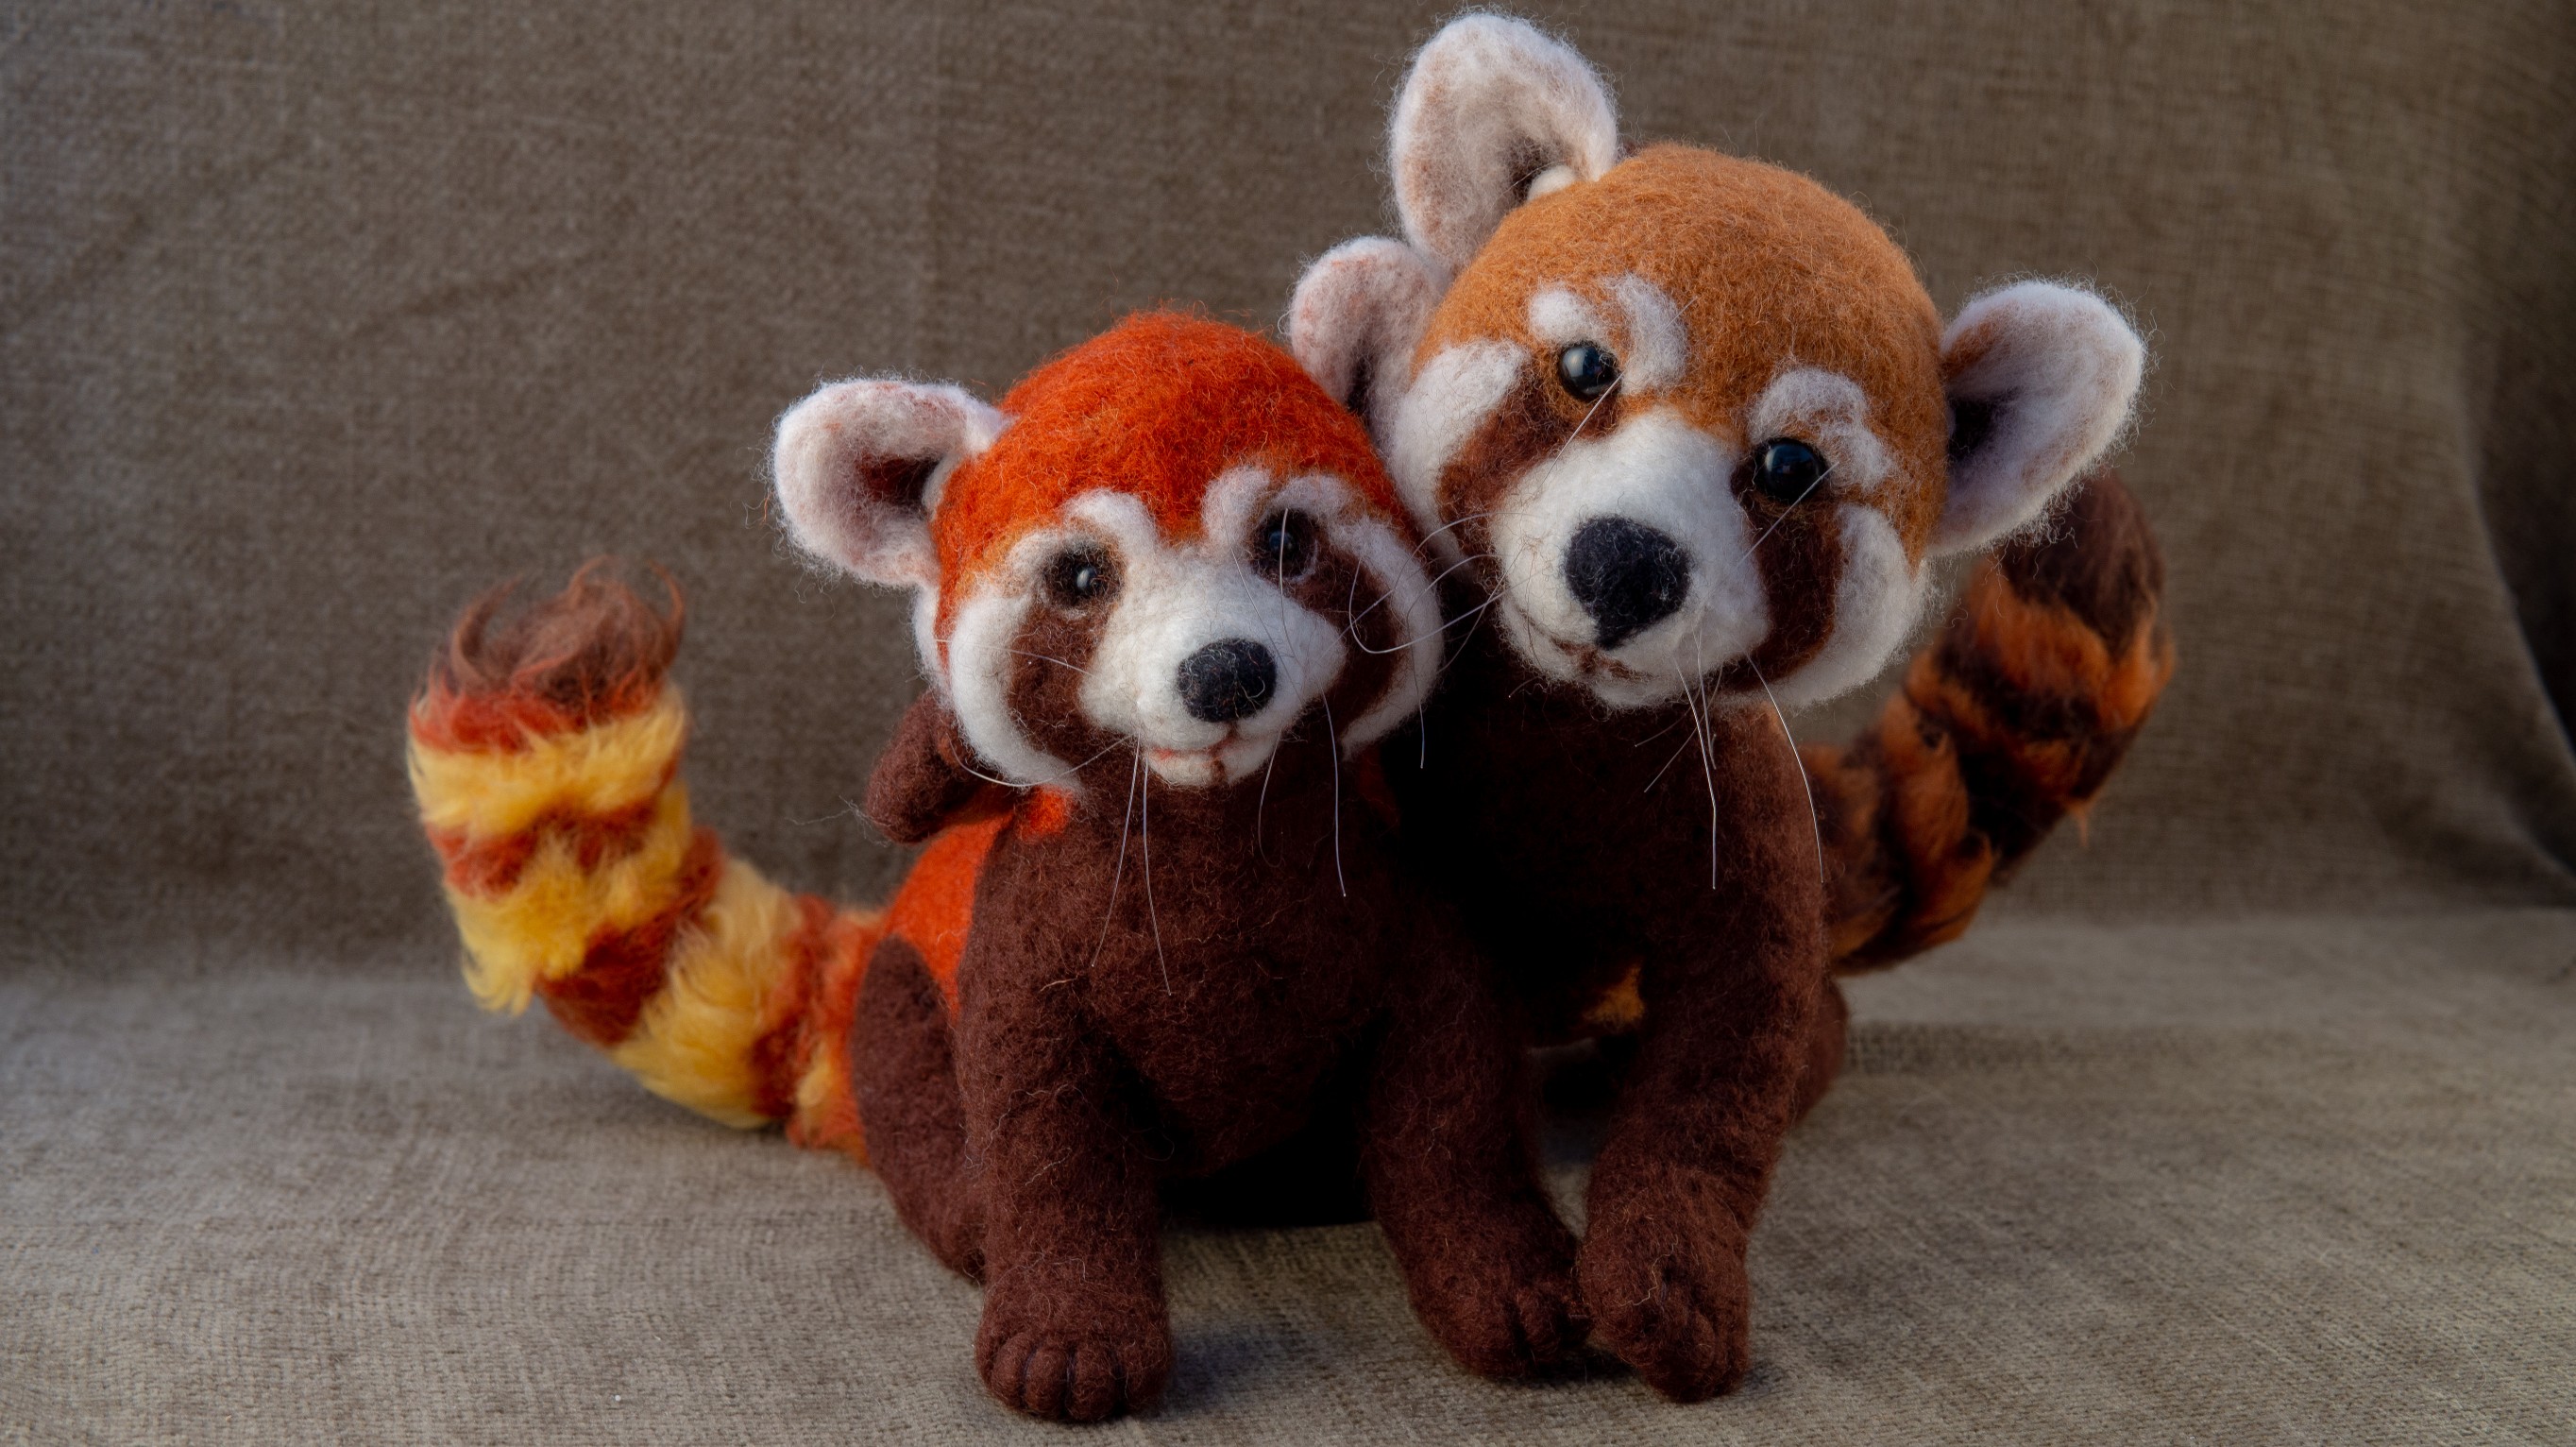 The Red Pandas